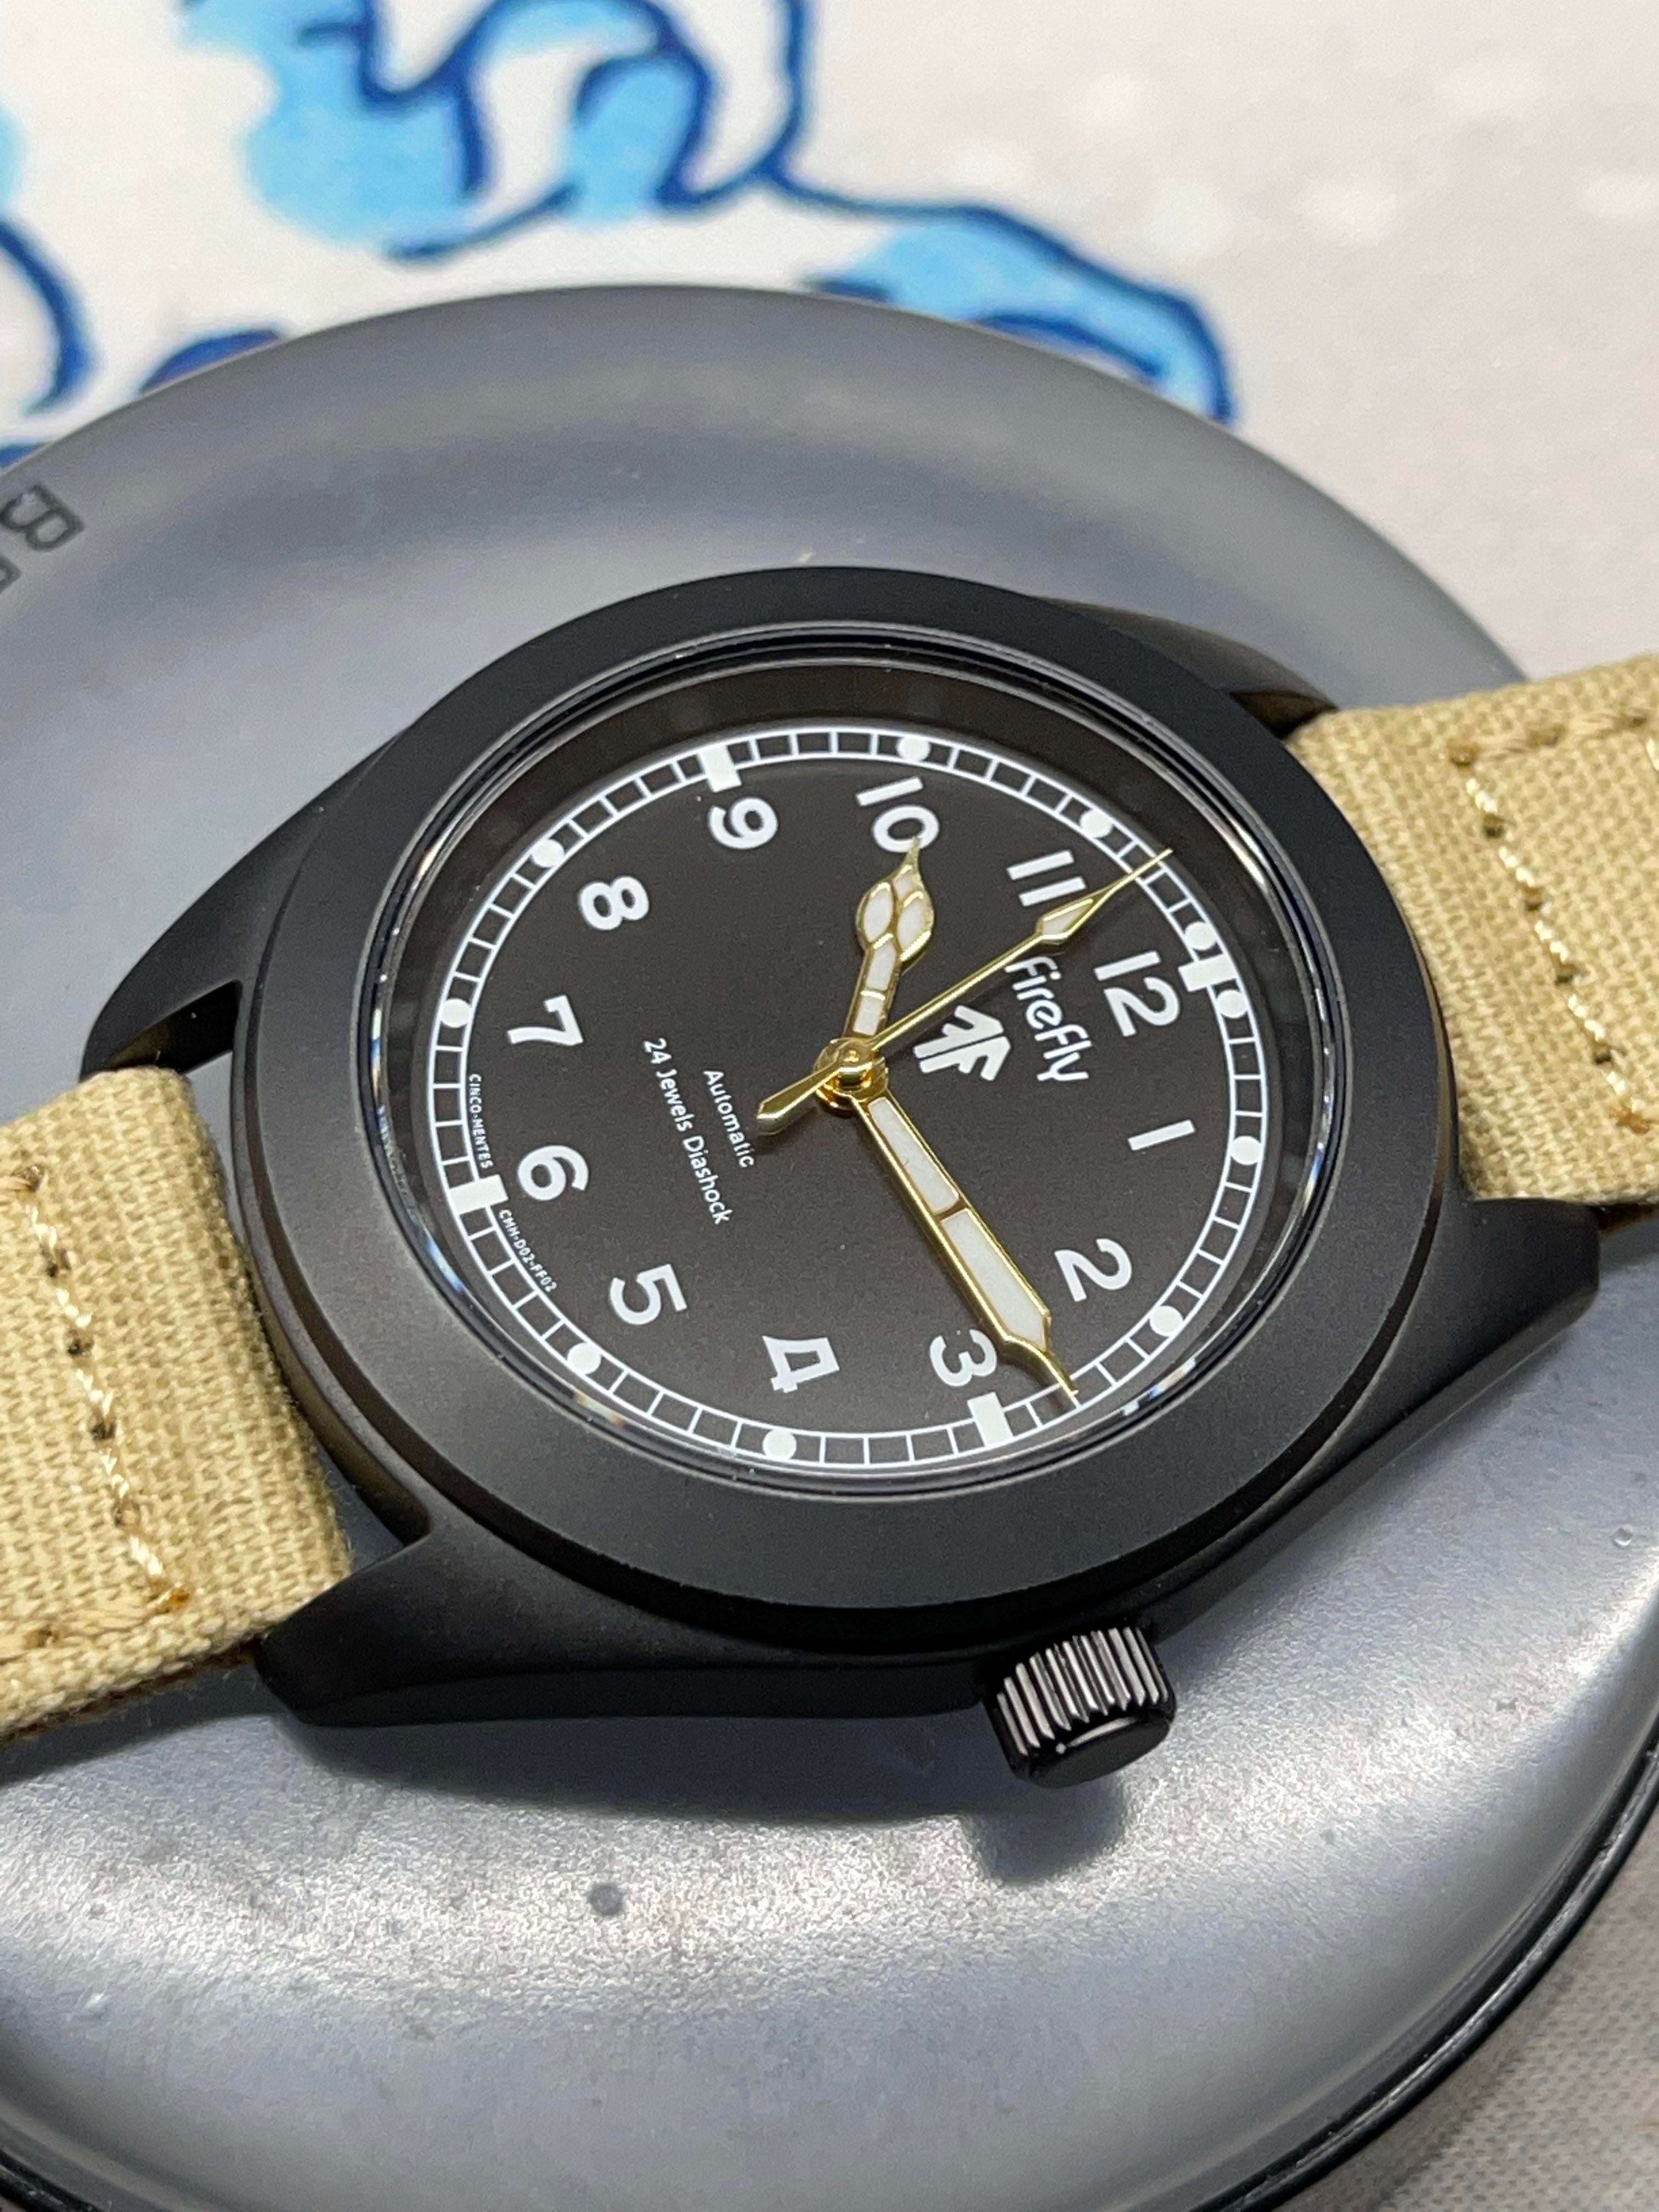 Does anyone else own a Firefly watch? | WatchUSeek Watch Forums